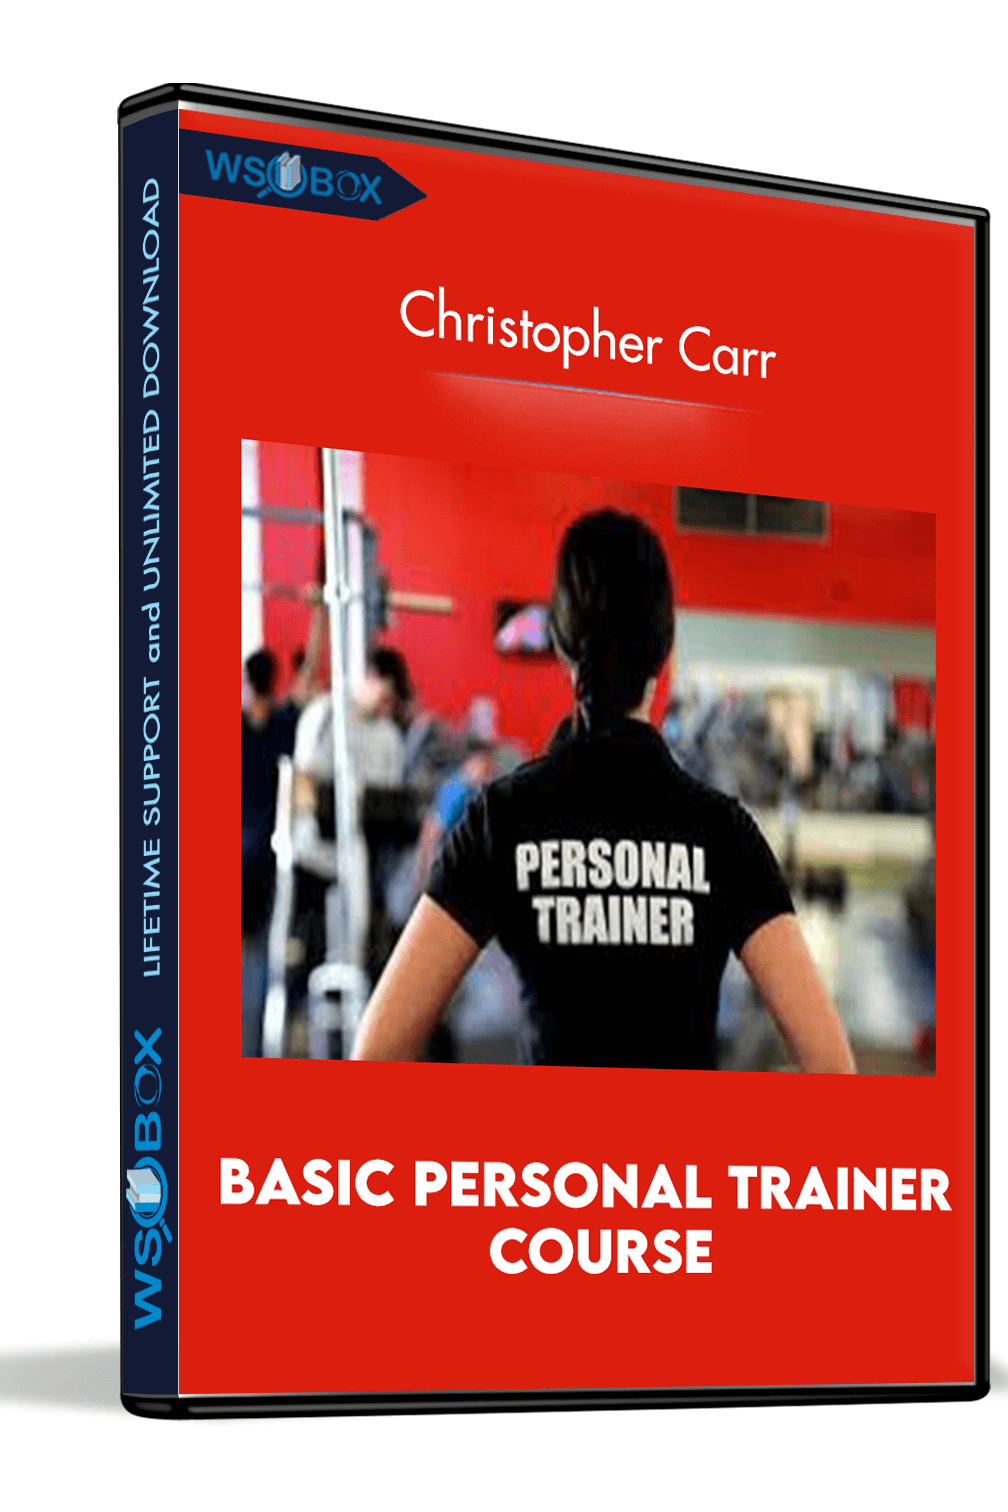 Basic Personal Trainer Course – Christopher Carr